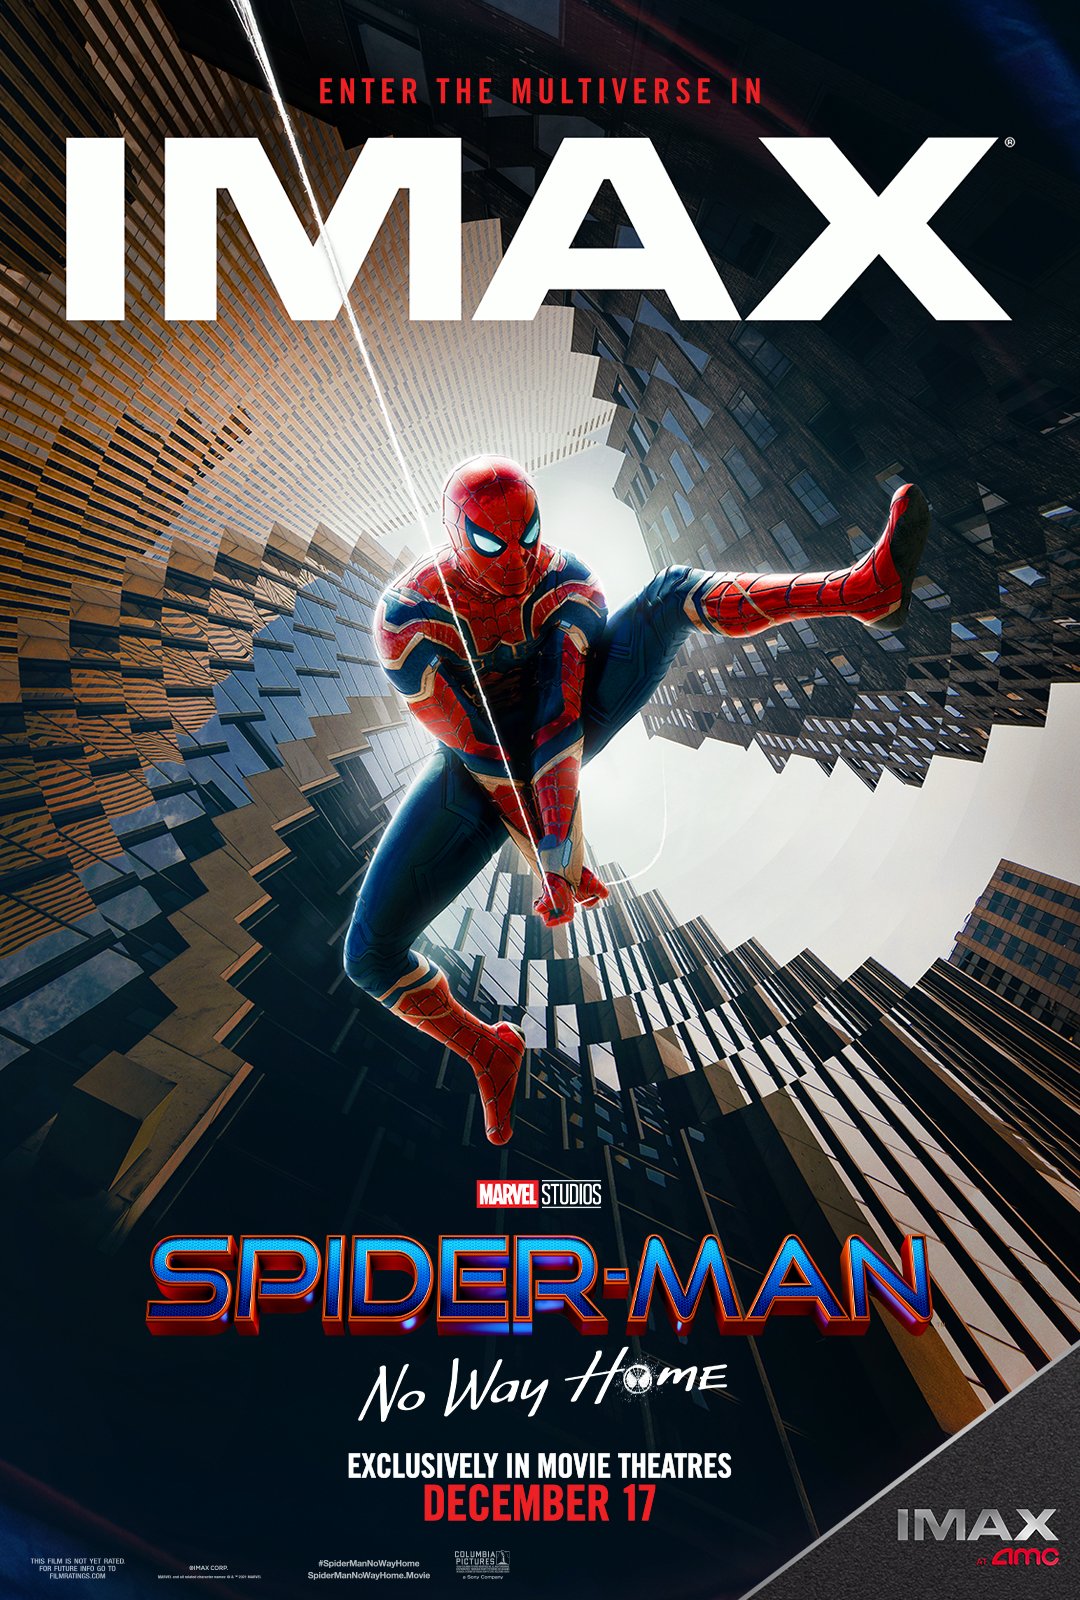 Tenslotte Accountant het ergste AMC Theatres on Twitter: "We searched throughout the multiverse to bring  you this @IMAX exclusive art featuring your favorite web slinger!  Experience 26% more picture for the entirety of #SpiderManNoWayHome in #IMAX